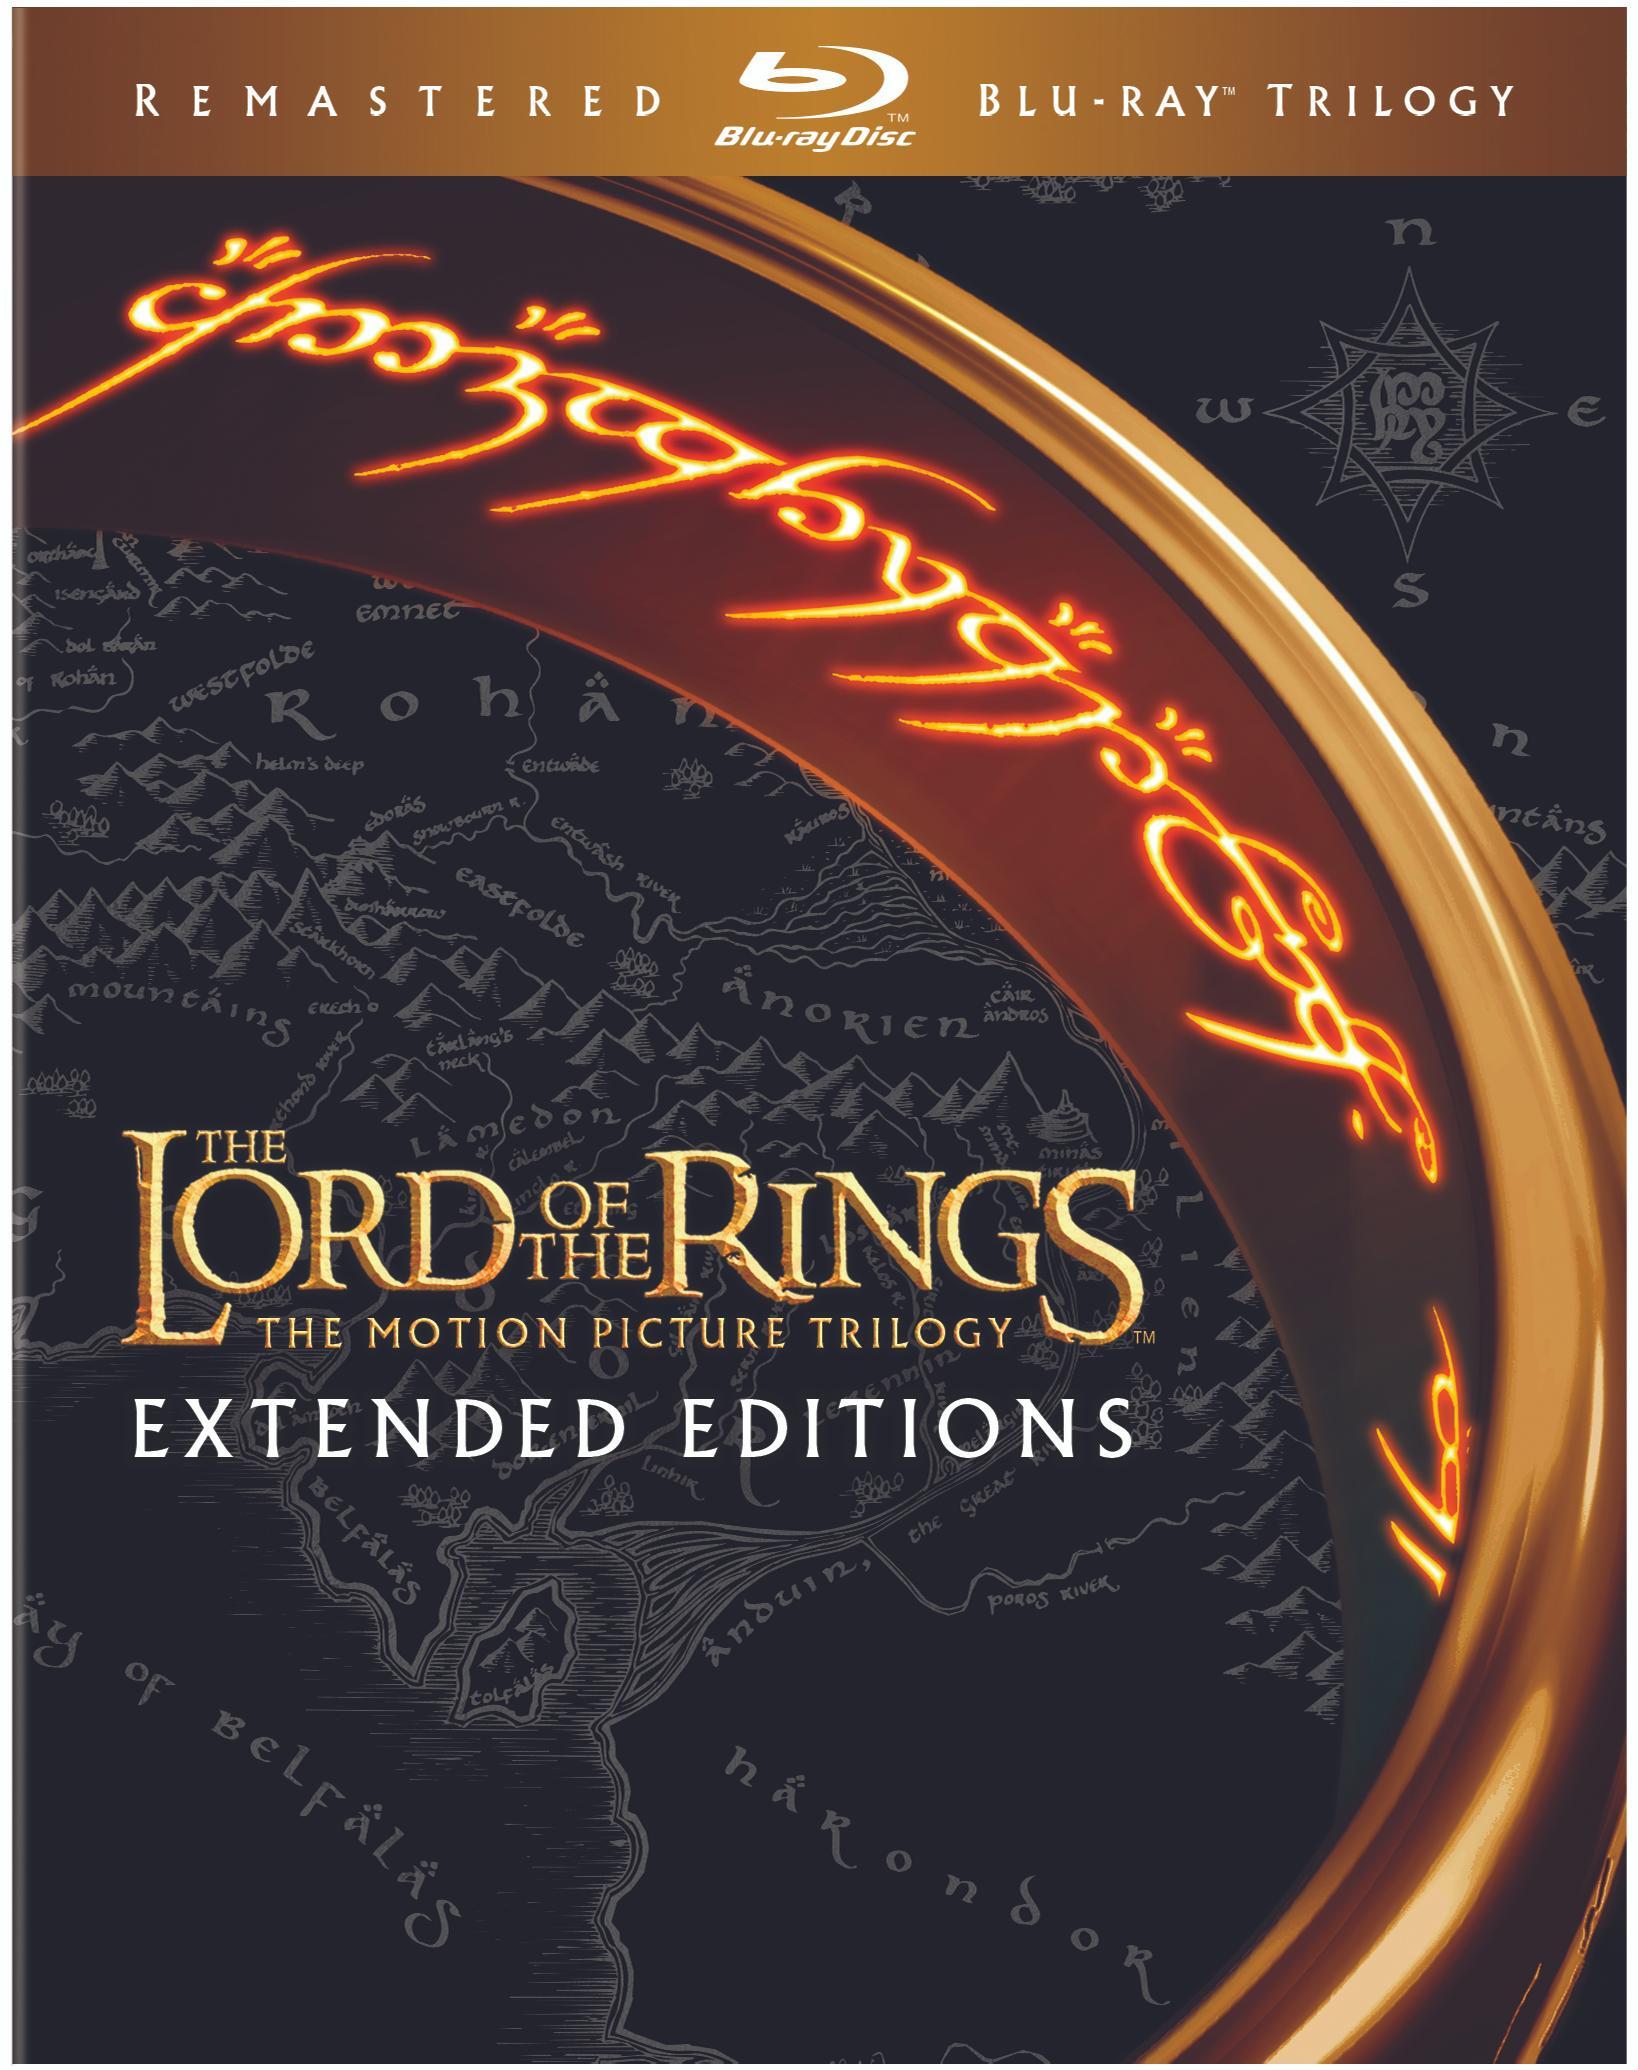 The Lord of the Rings: The Return of the King (2-Disc Extended Edition)  [Blu-ray]